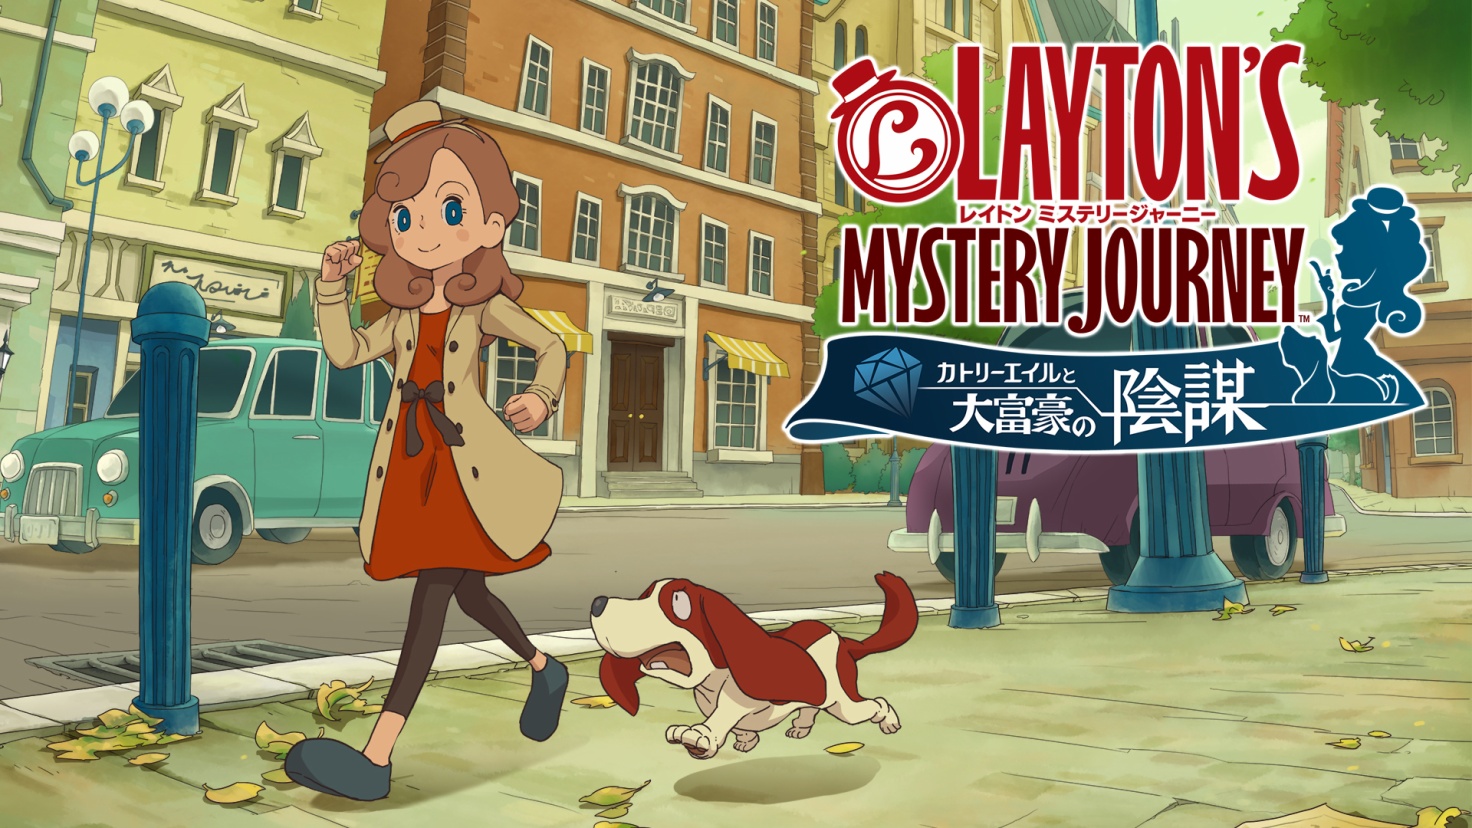 level-5-says-layton-s-mystery-journey-is-the-same-on-3ds-and-mobile-talks-new-protagonist